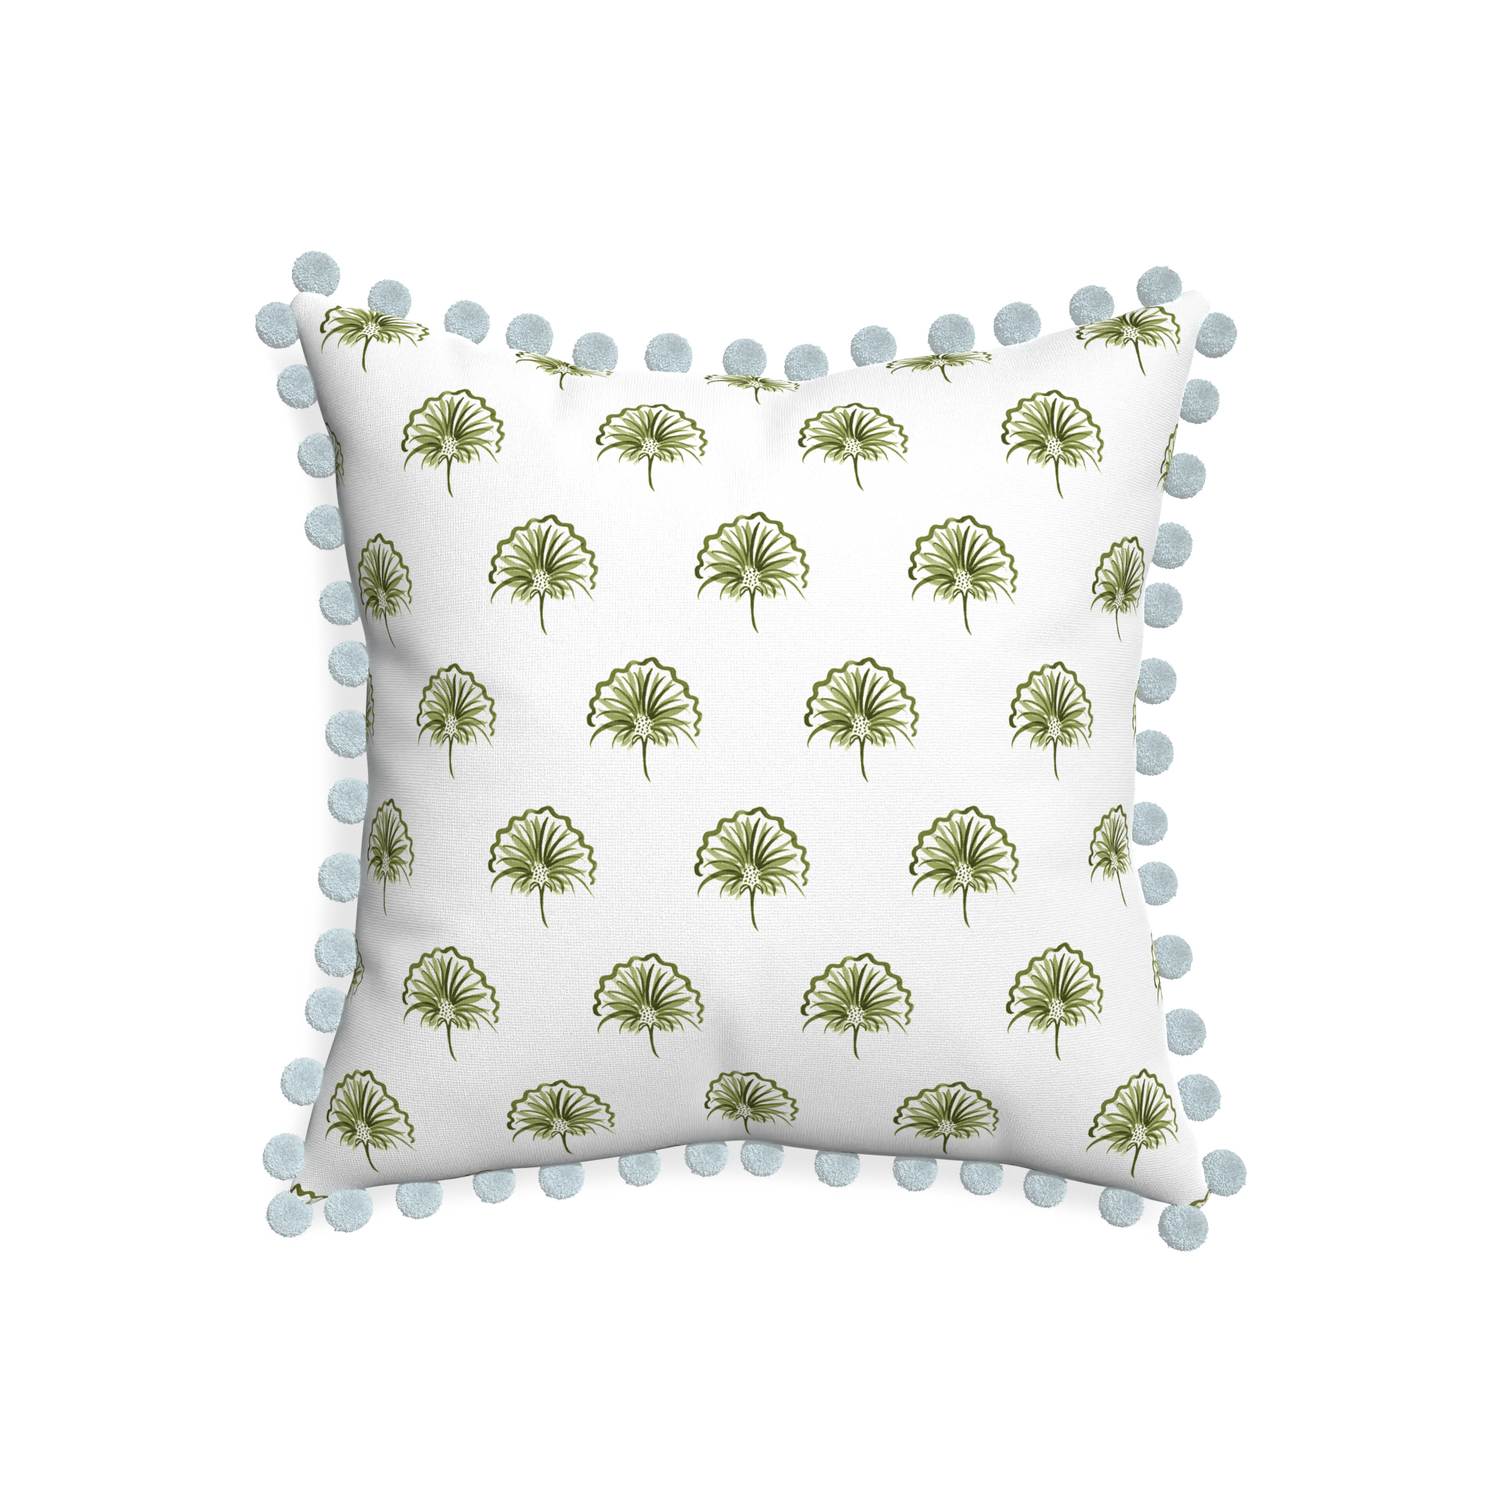 20-square penelope moss custom green floralpillow with powder pom pom on white background